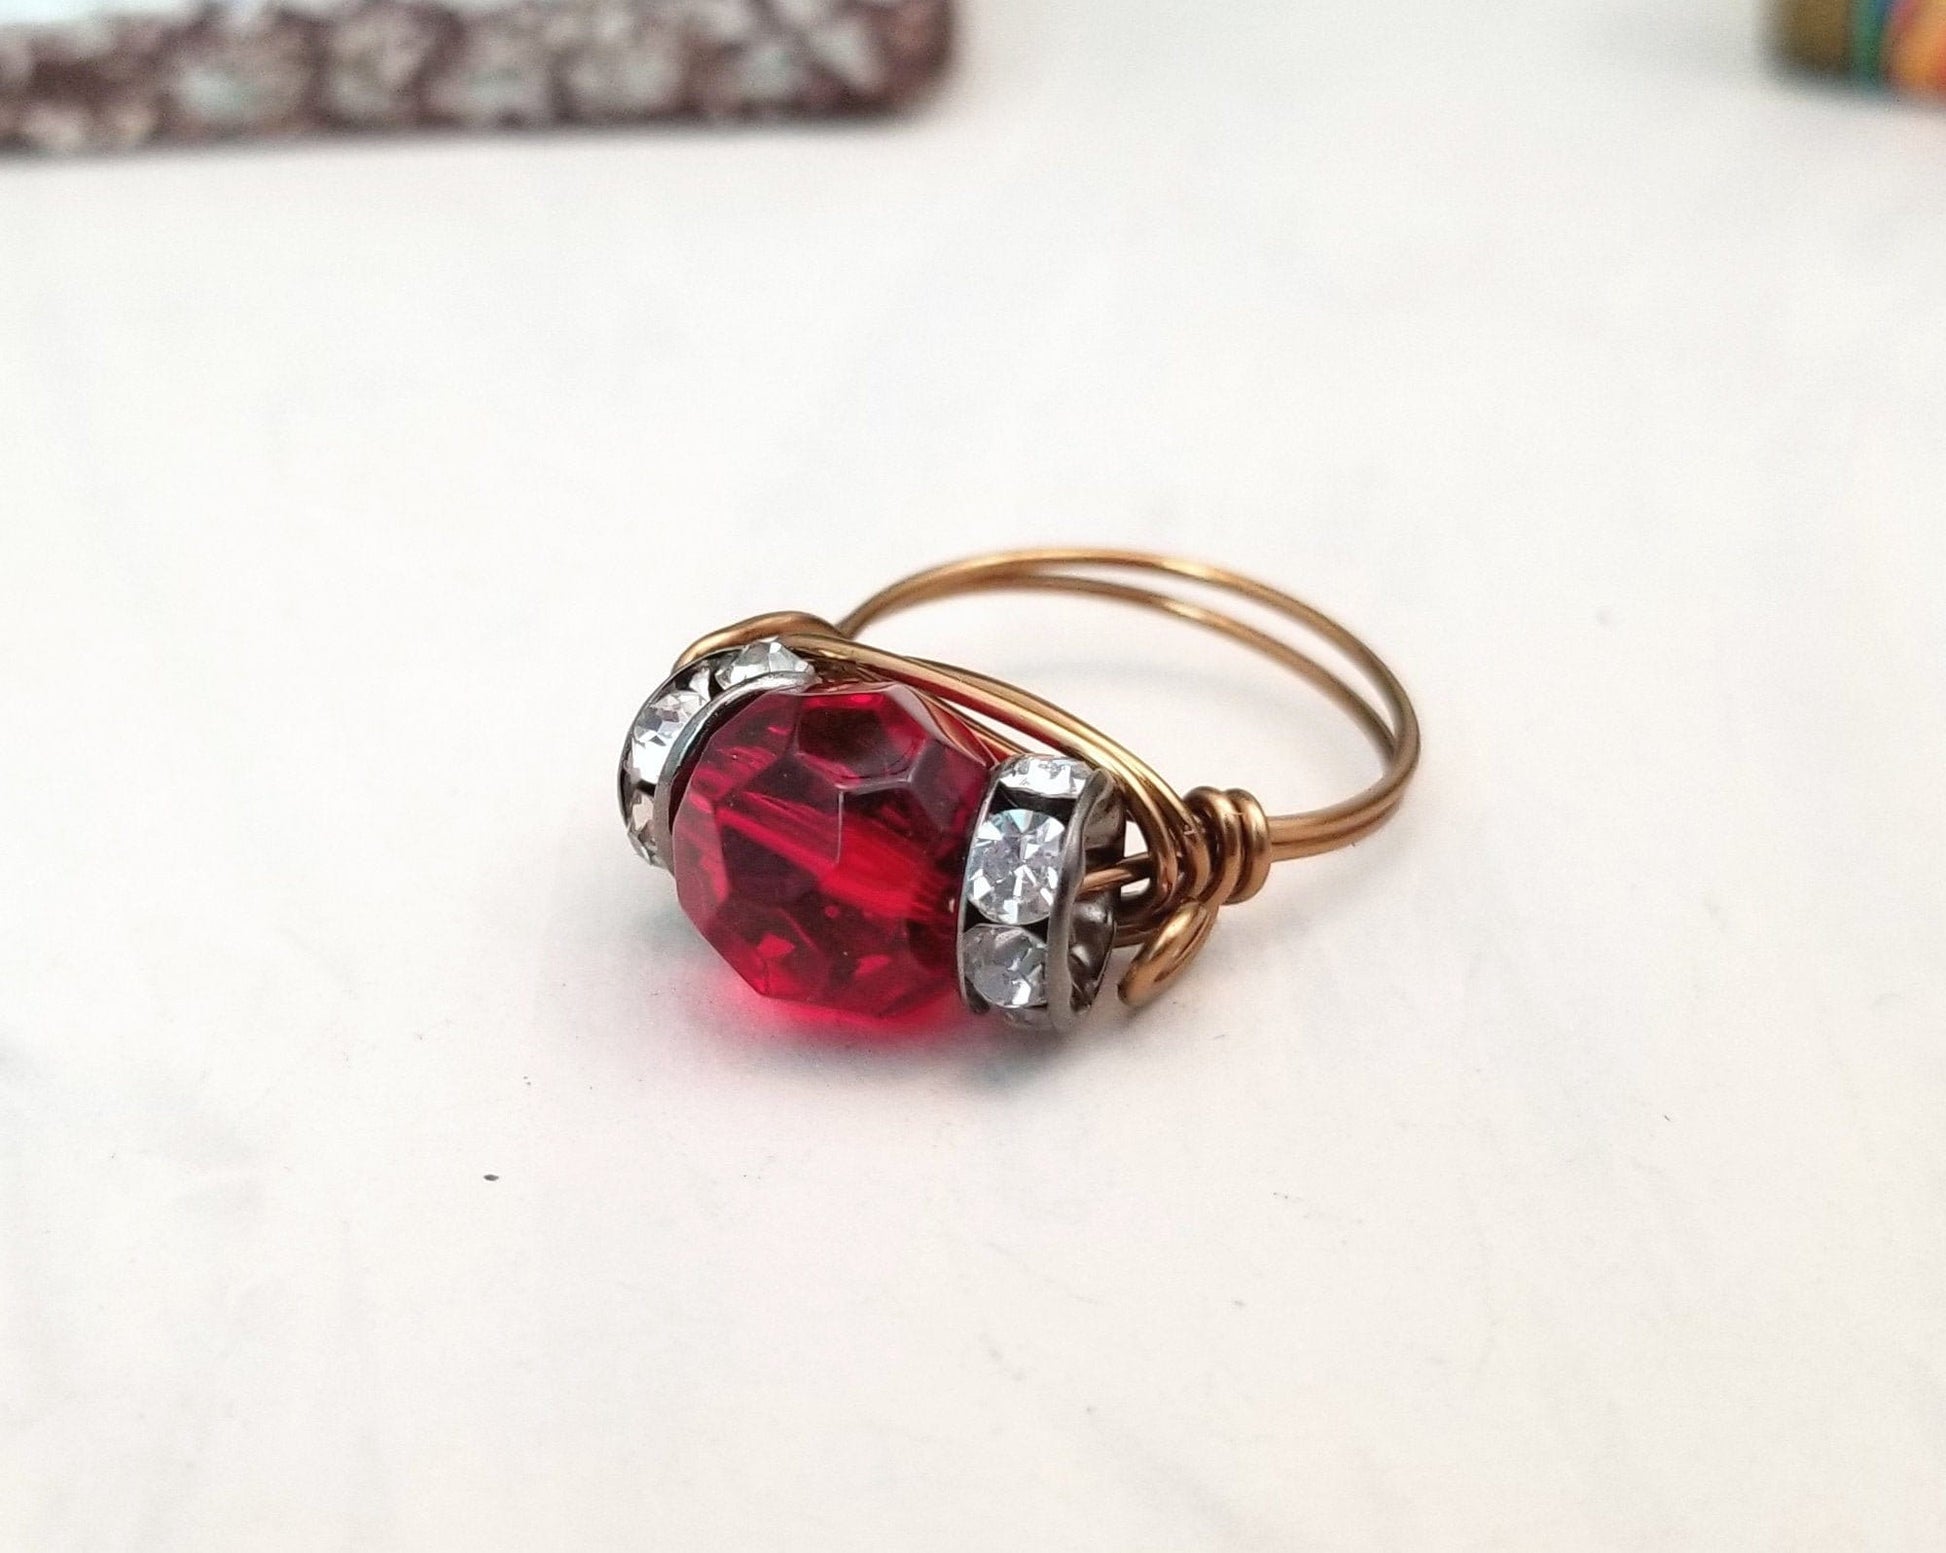 Wire Ring in Red with Rhinestones, Fairy Tale, Renaissance, Medieval, Choice of Colors and Metals